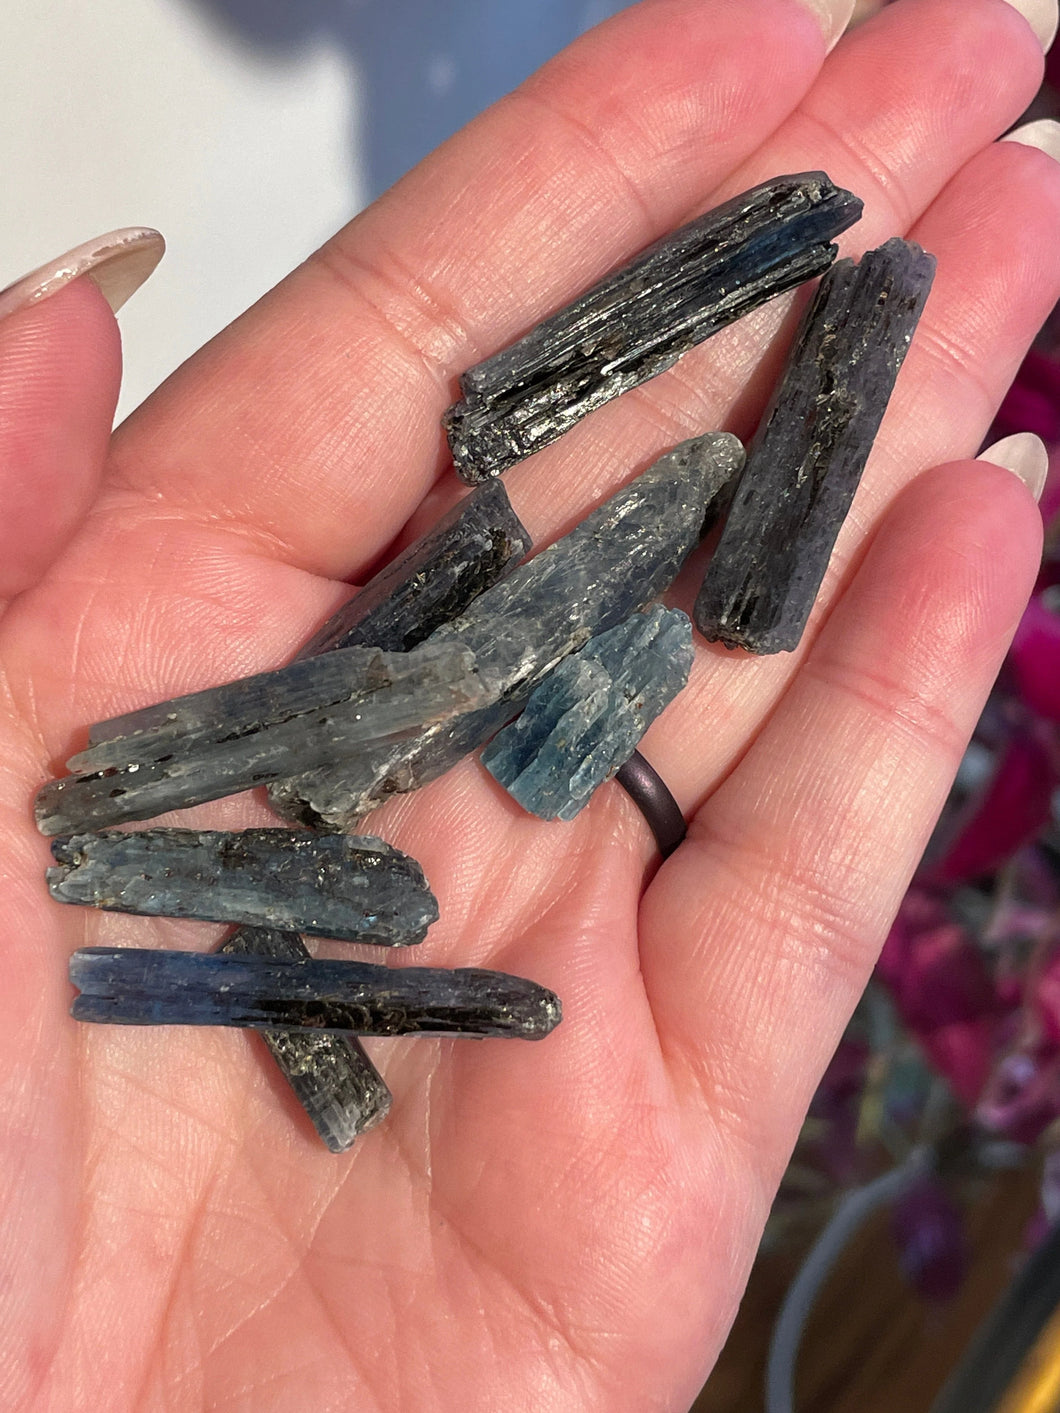 The Consecrated Crystal Crystals, Stones, Minerals Blue Kyanite w/Black Mica Pieces